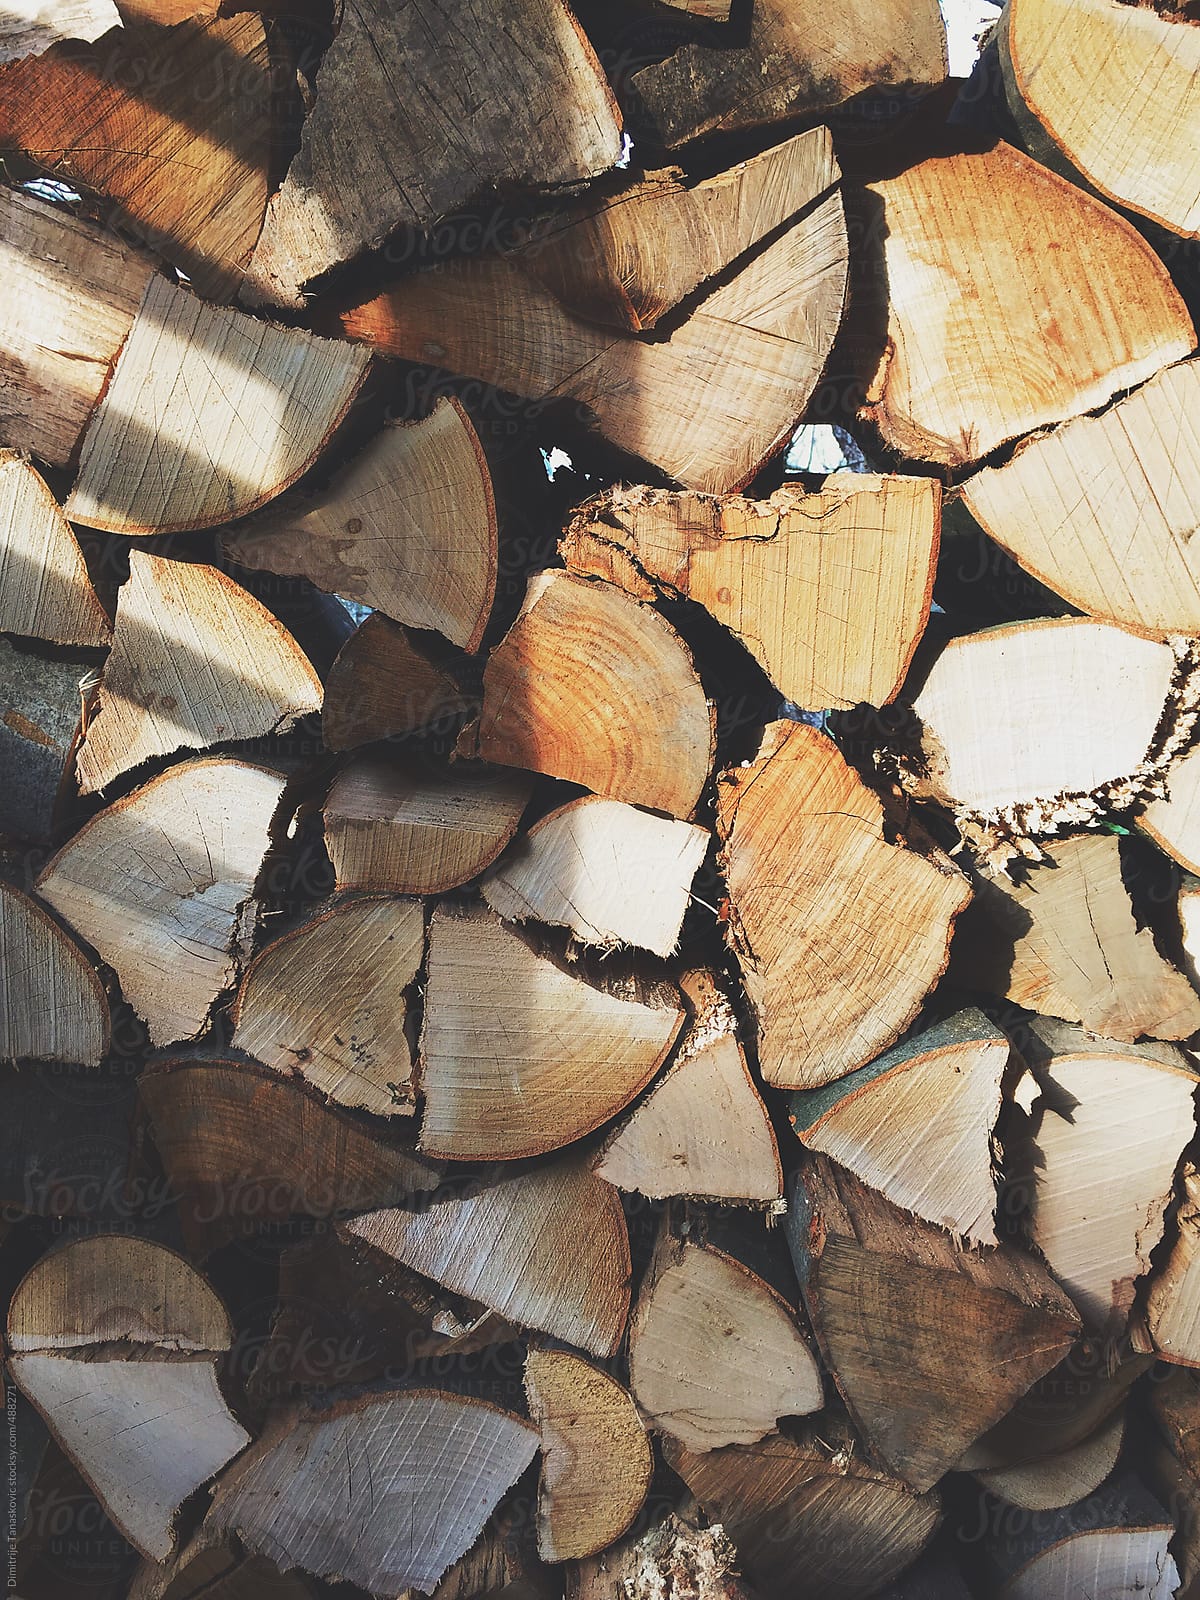 Close up image of packed and chopped firewood